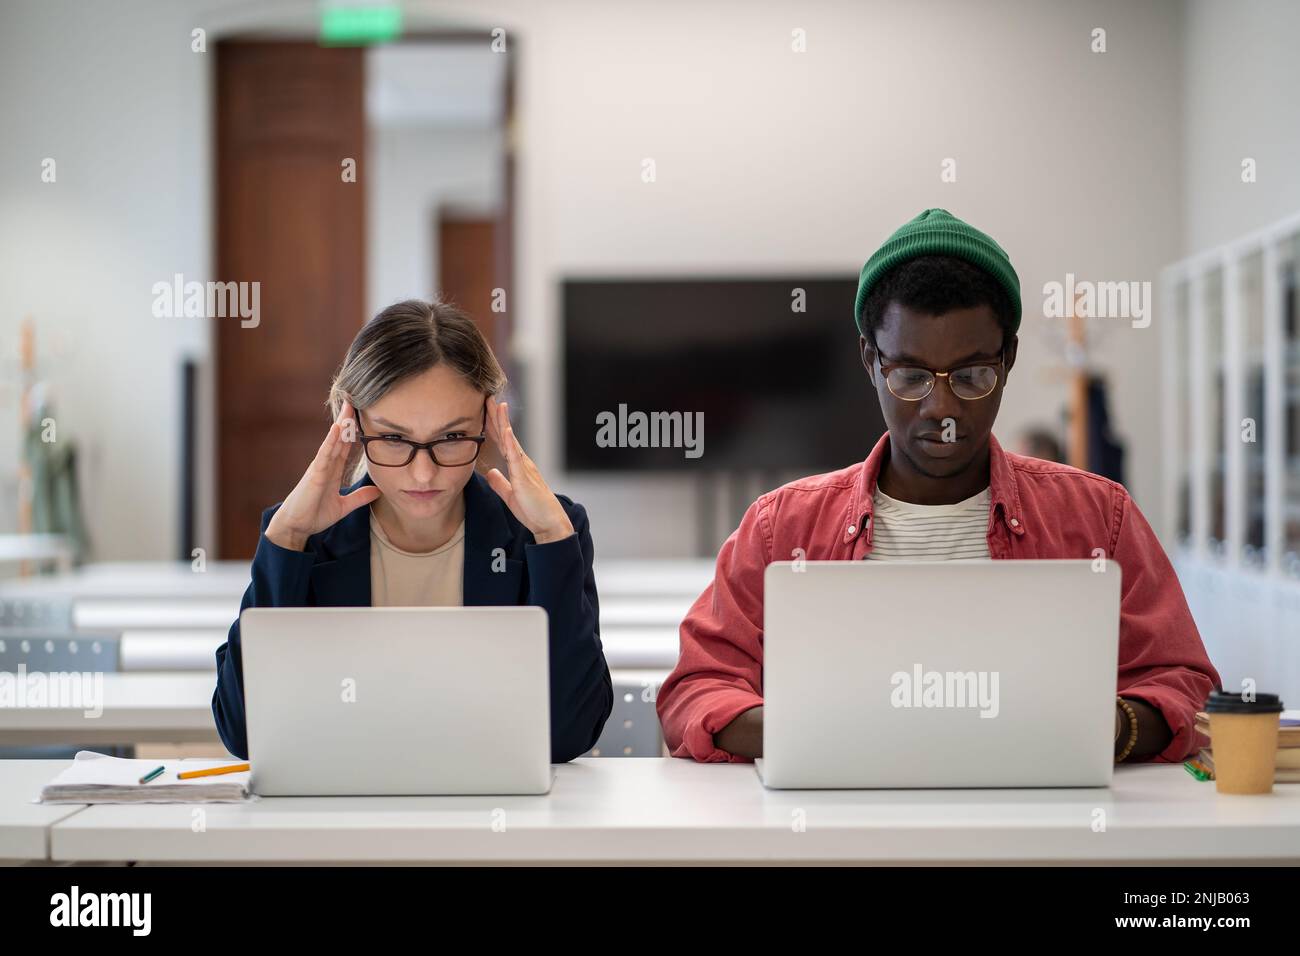 Concentrated serious students learning sitting in desktop in college lecture classroom with laptops. Stock Photo